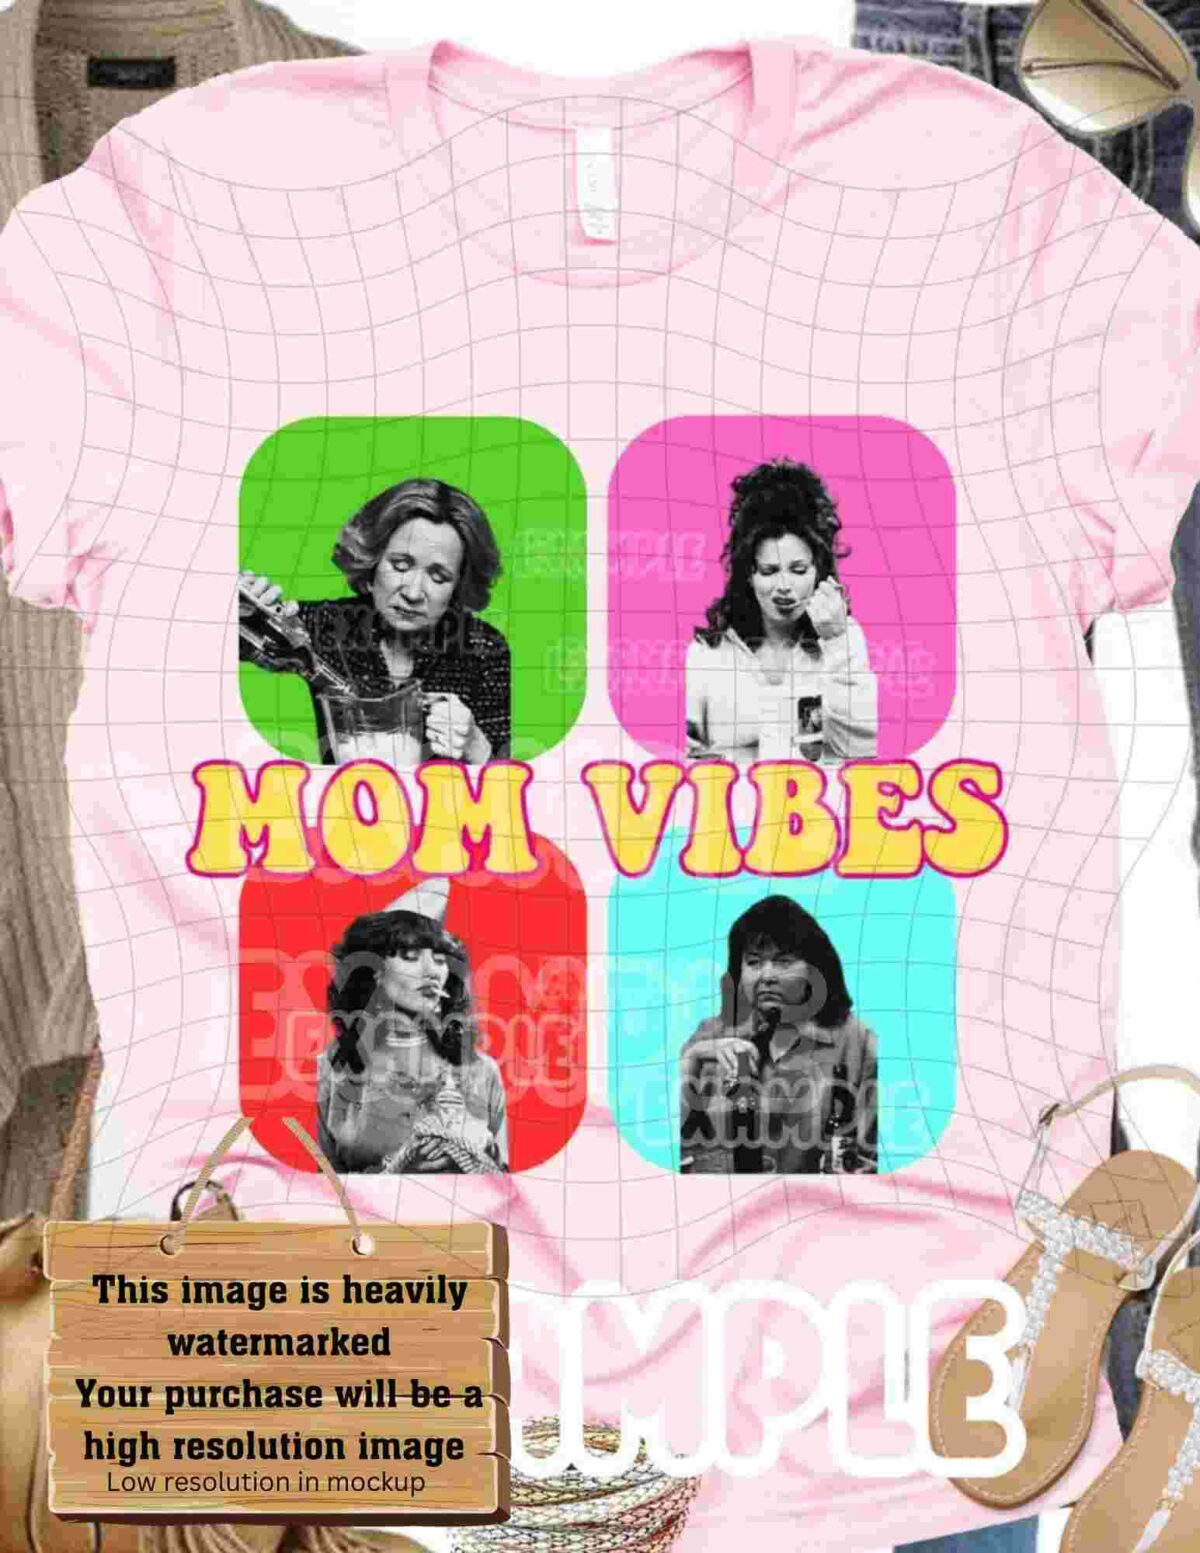 A pink T-shirt is displayed with colorful panels showing four black-and-white images of women. The text "MOM VIBES" is prominently featured in yellow with a red outline. The background includes various accessories, such as shoes and a bag.